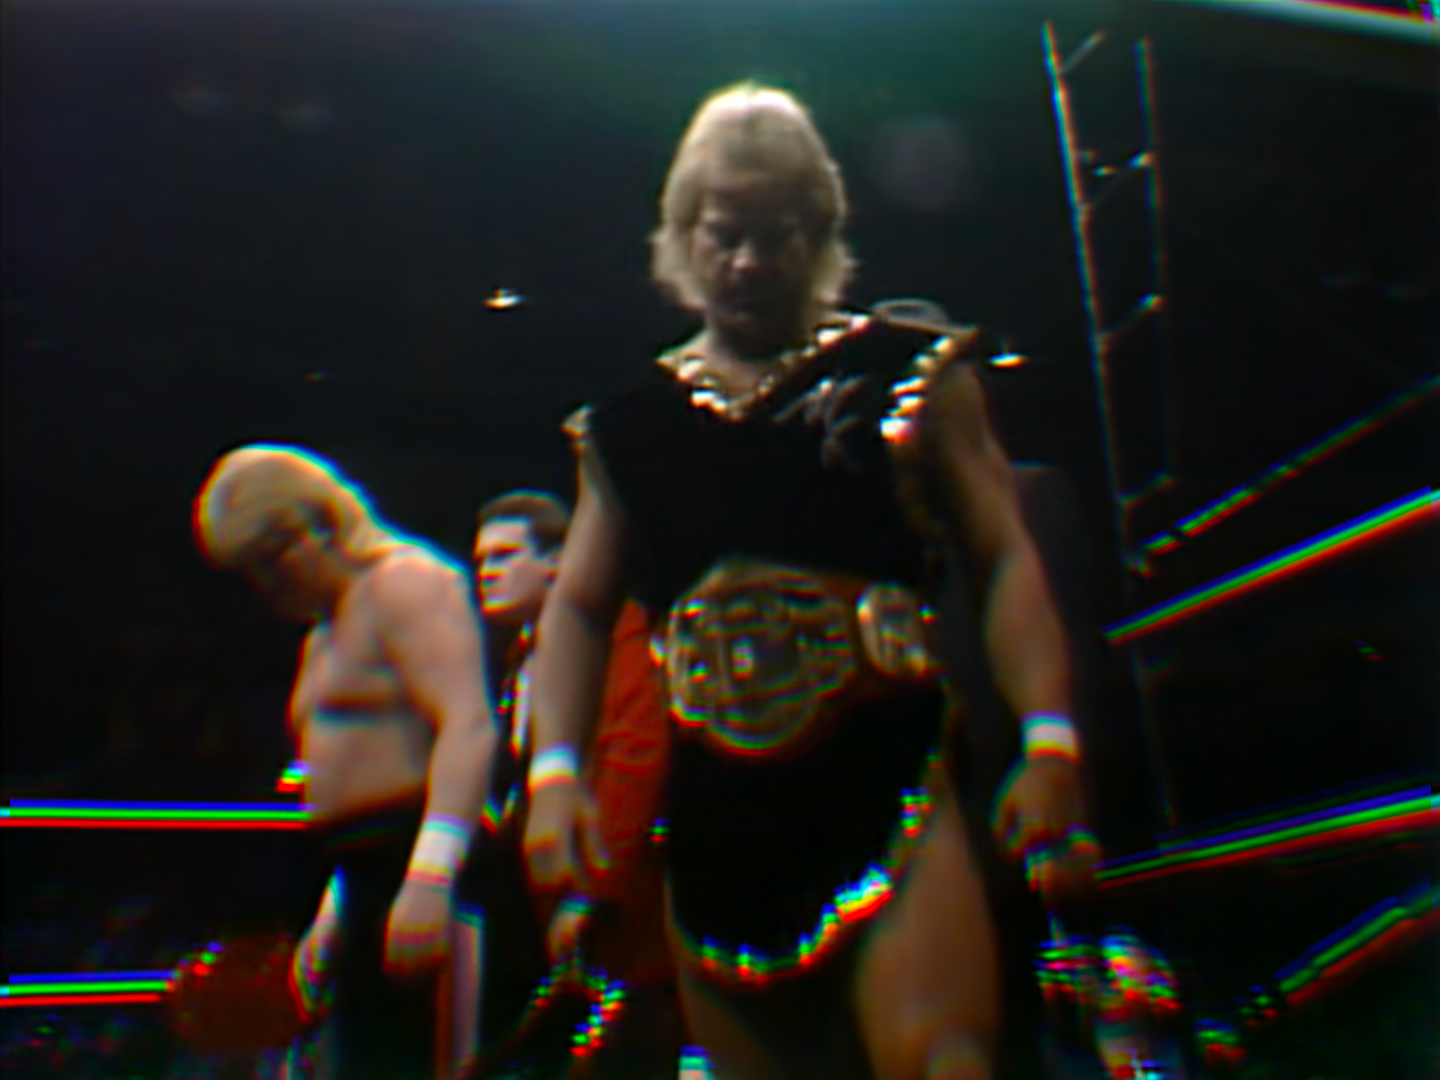 The Midnight Express